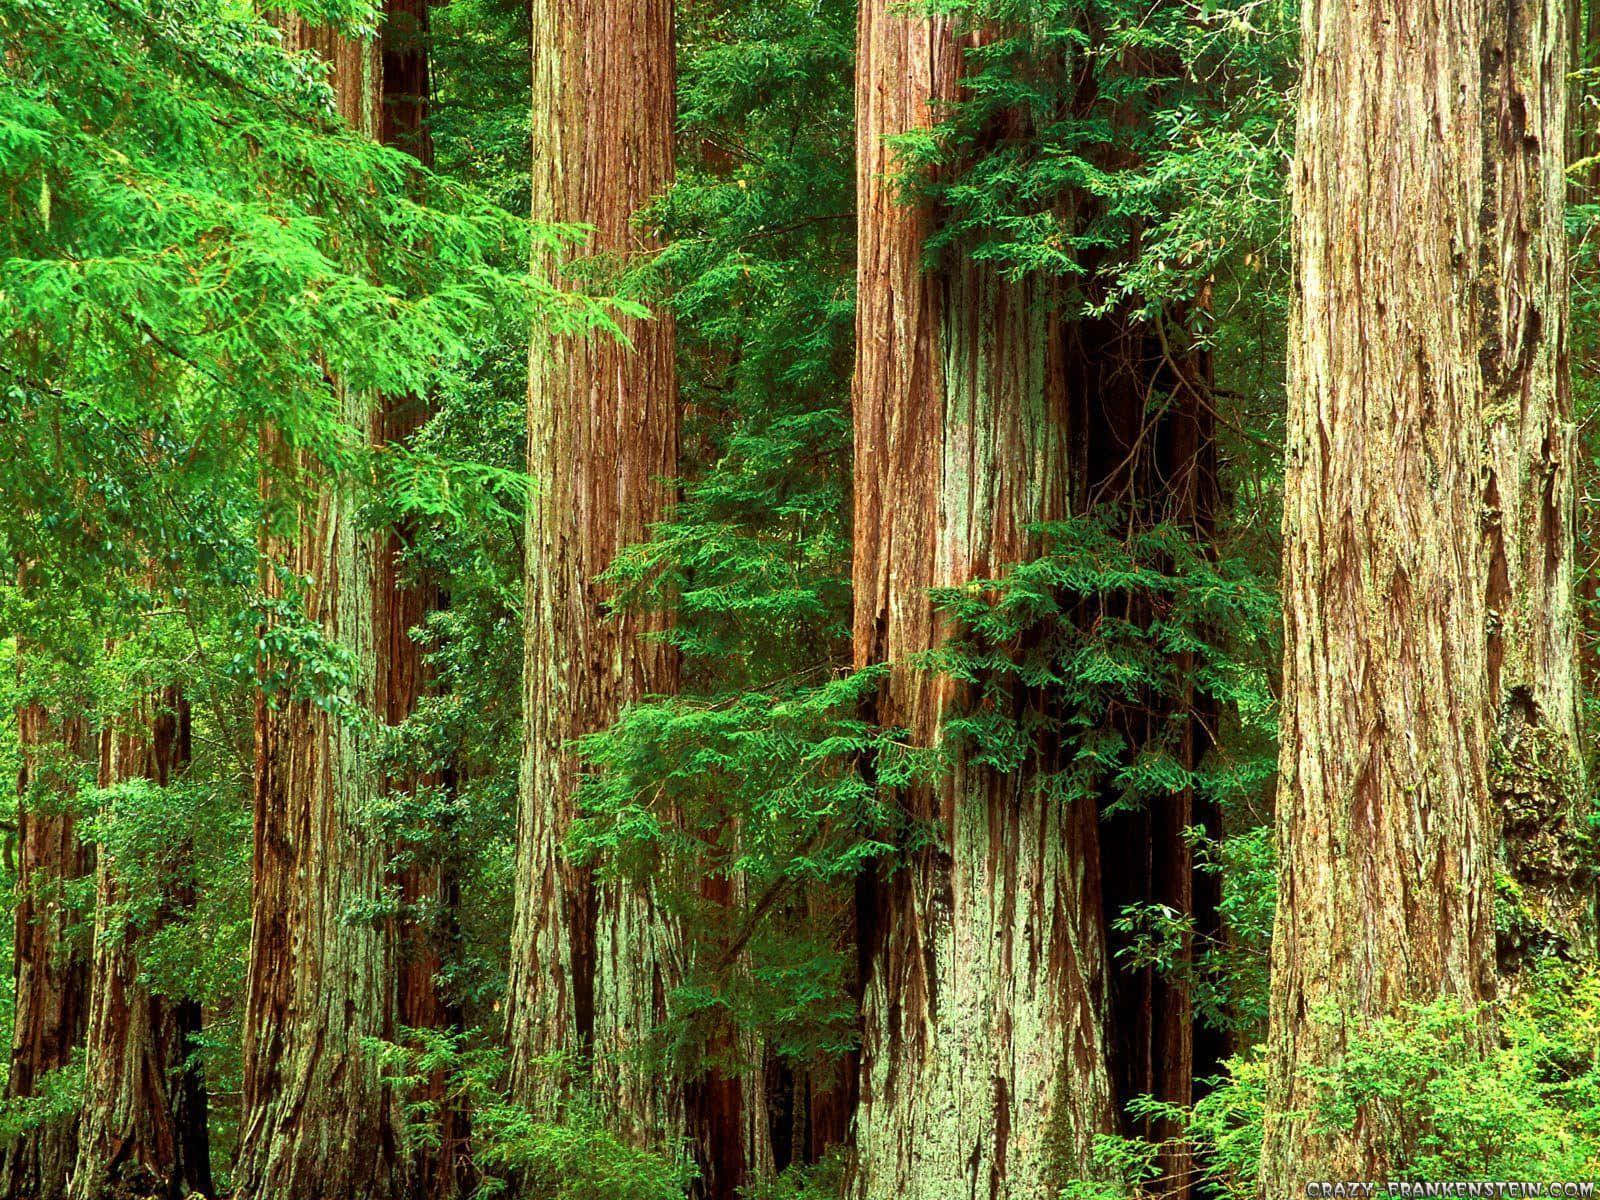 "Majestic Redwood Trees in Northern California"